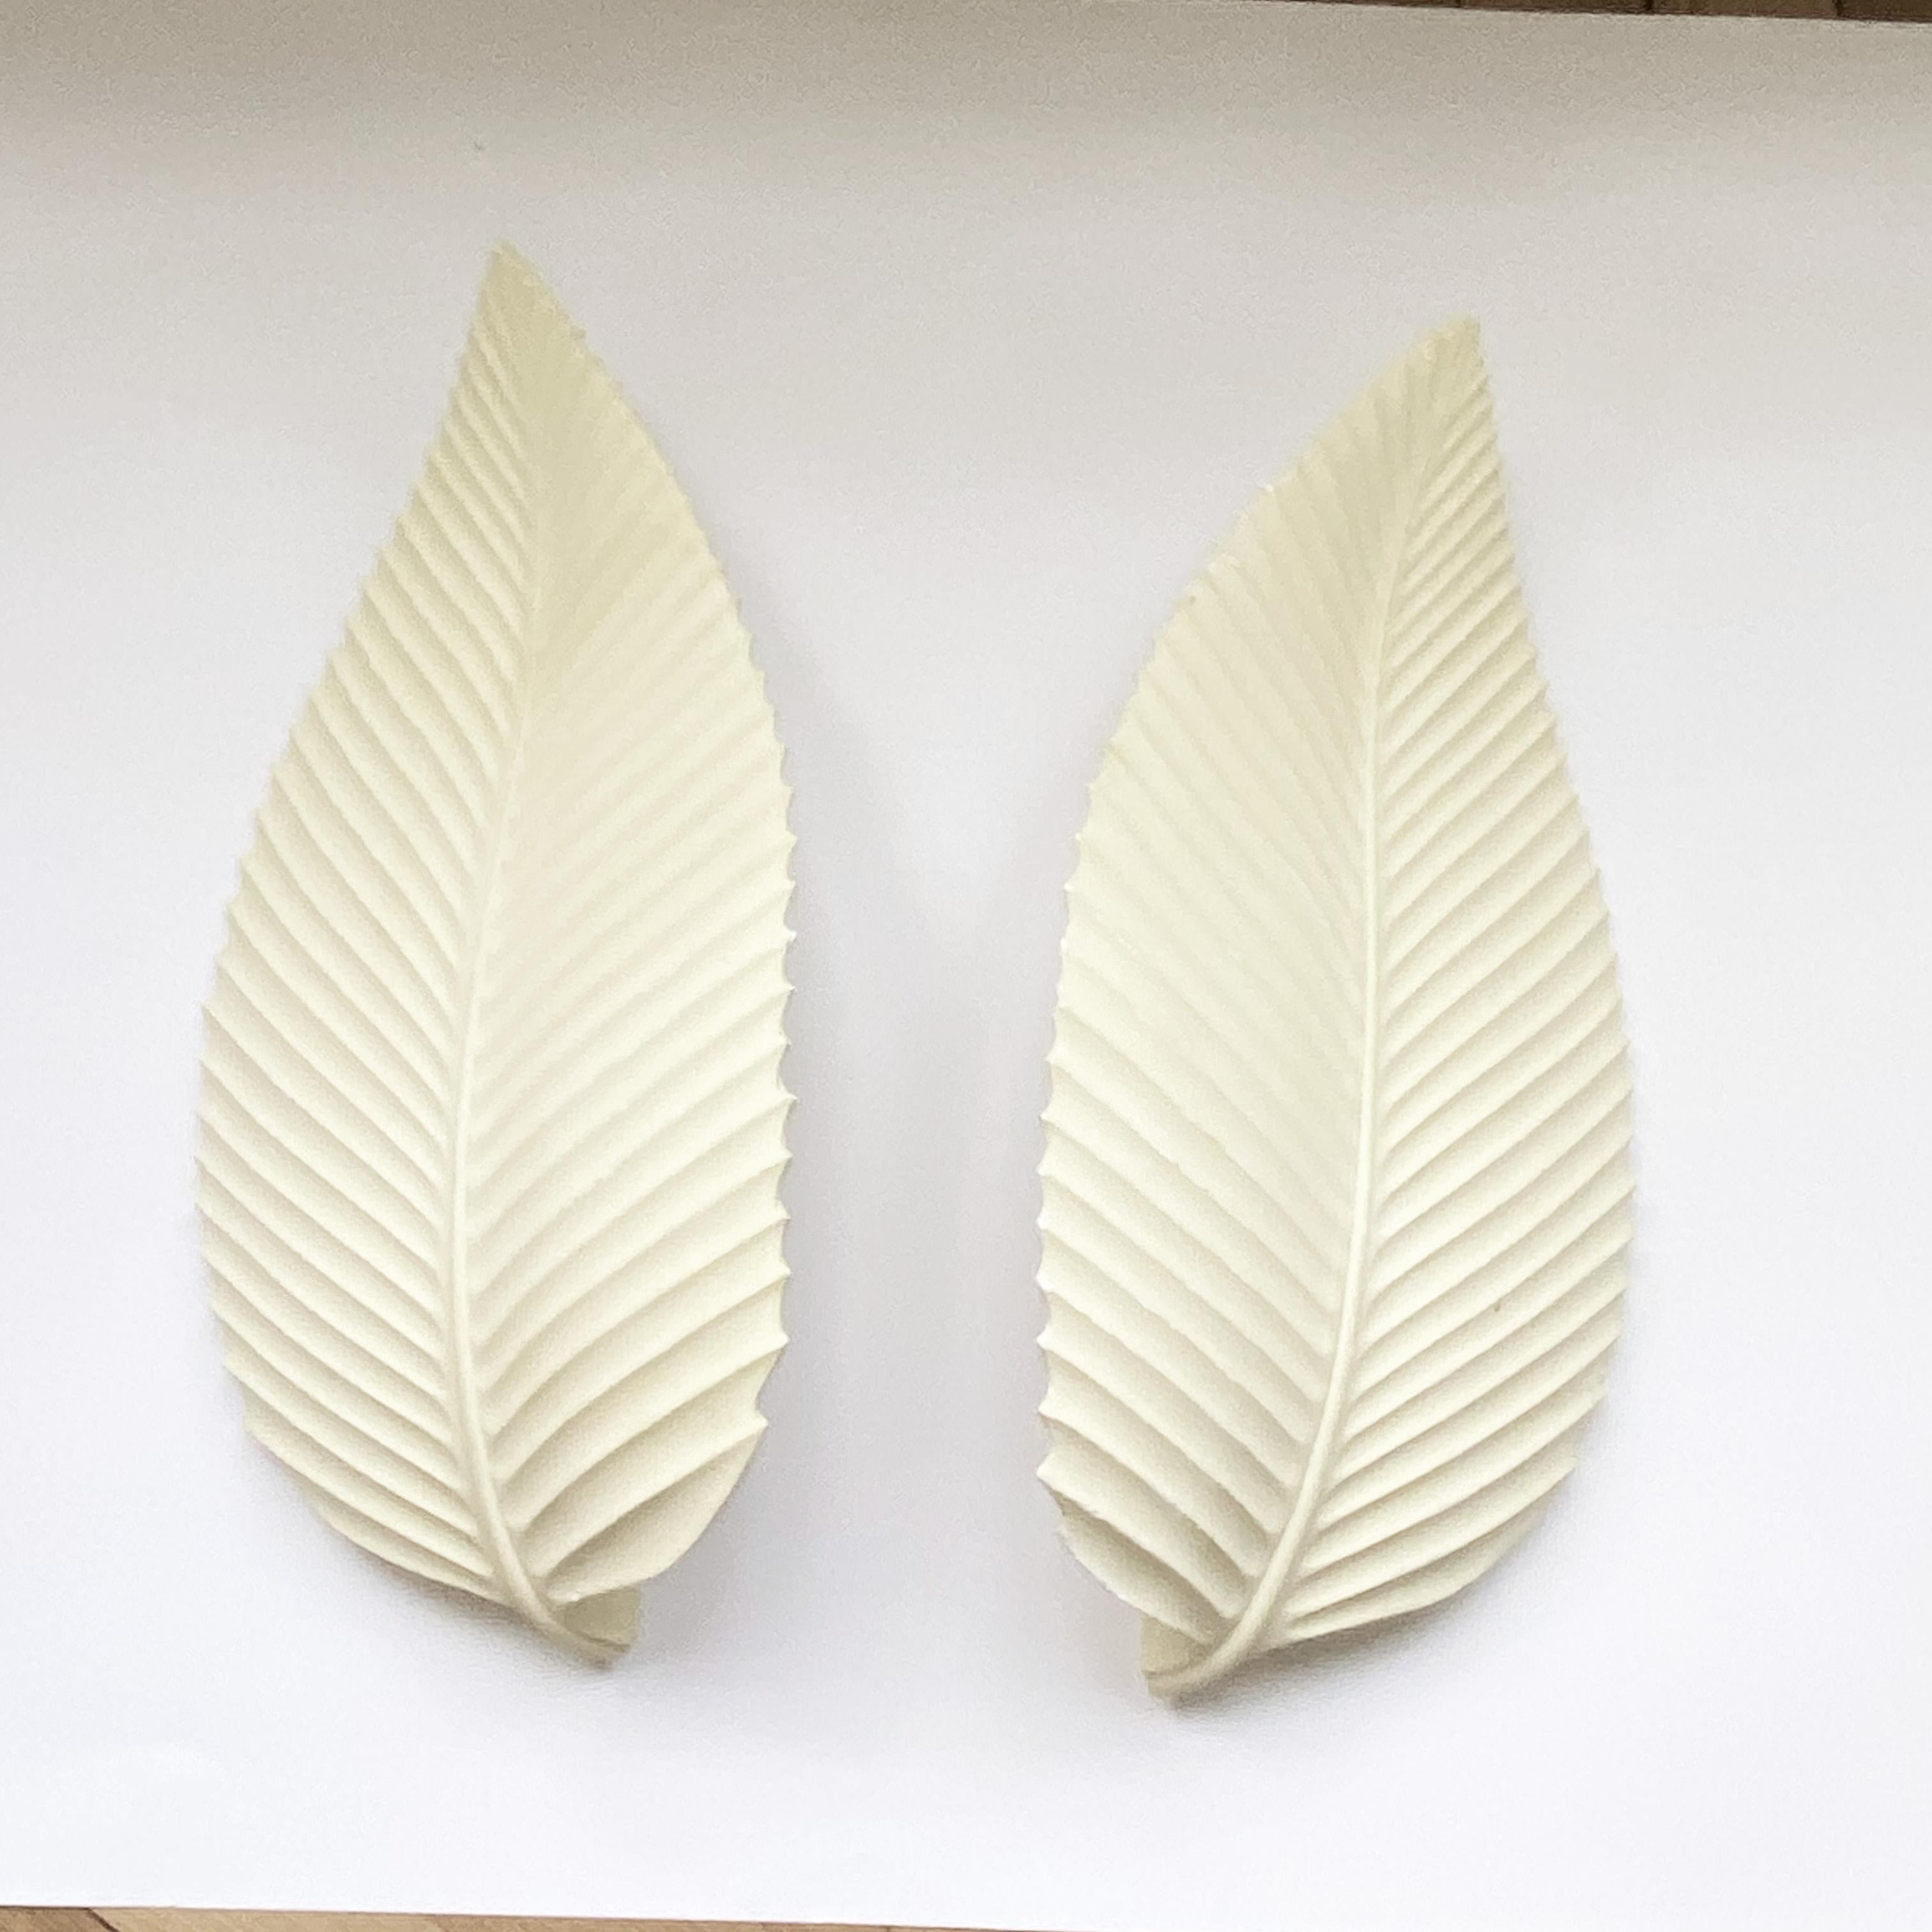 2 French Plaster Beech Leaf Sconces, 1990s.